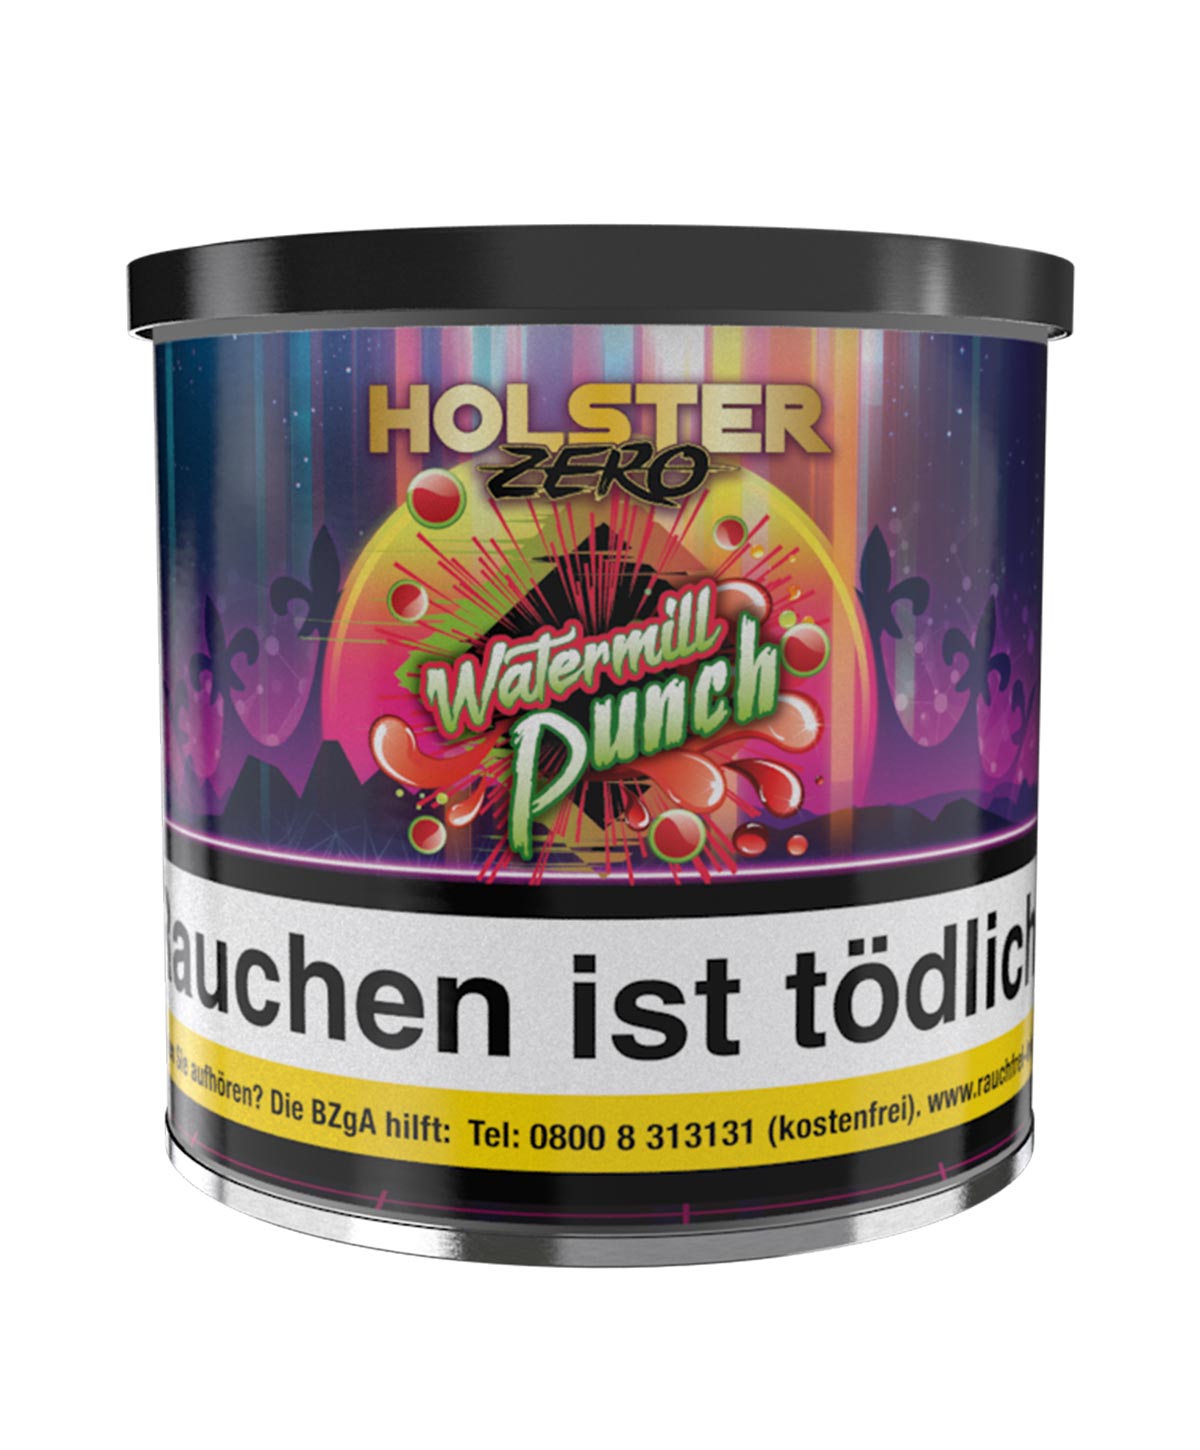 Holster Zero Watermill Punch Dry Base 75g